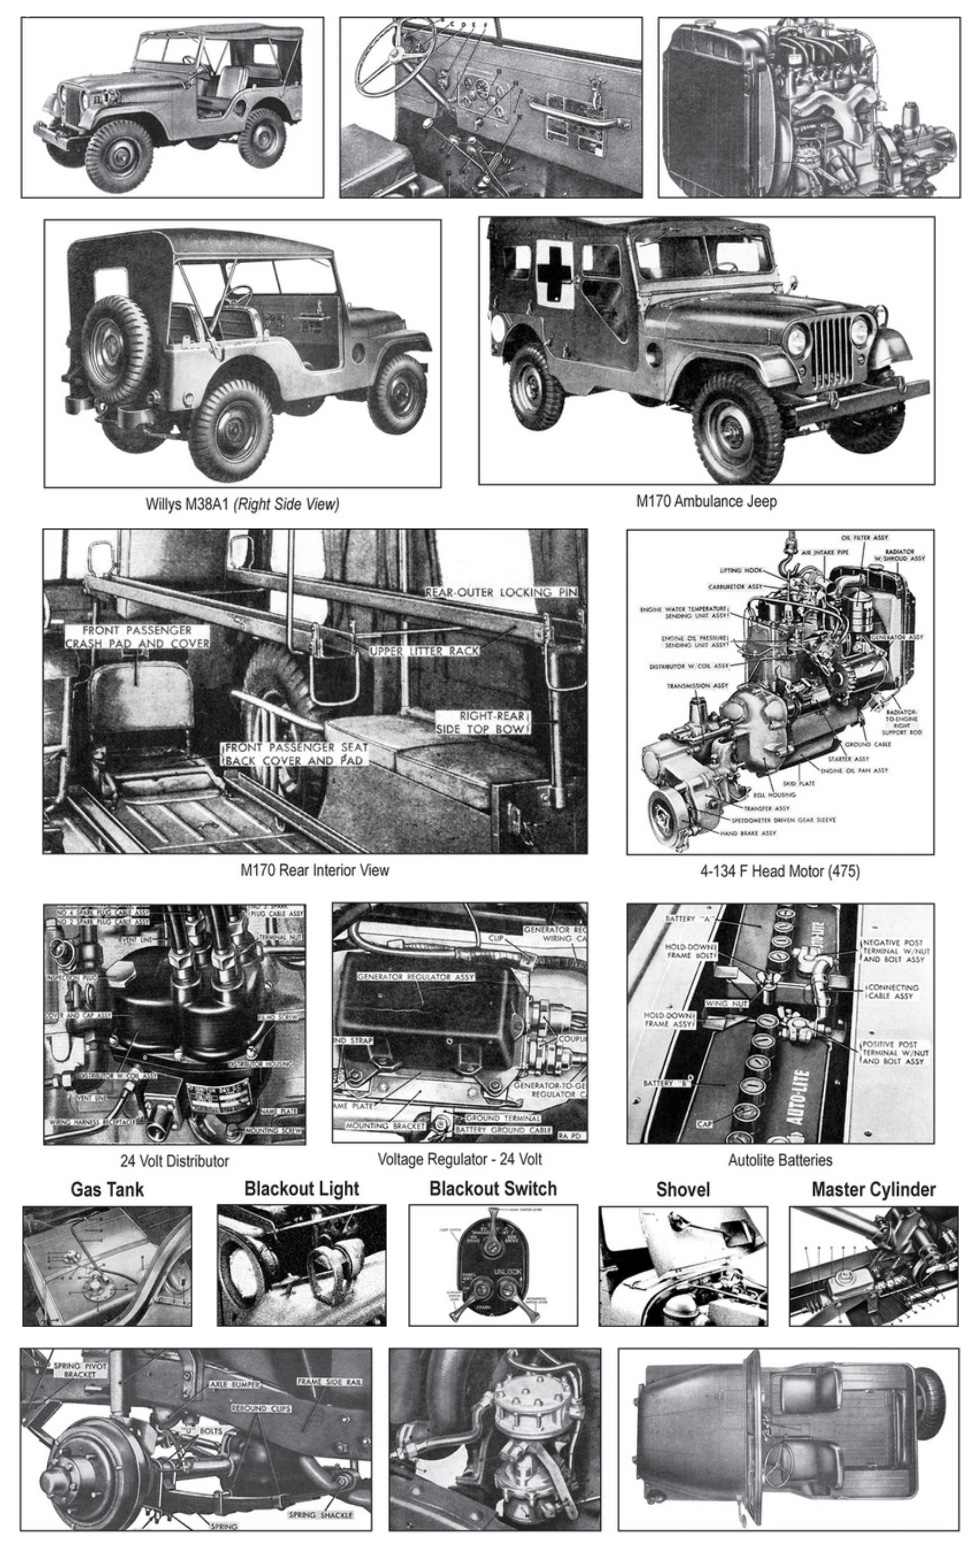 Willys M38A1 Detailed Views